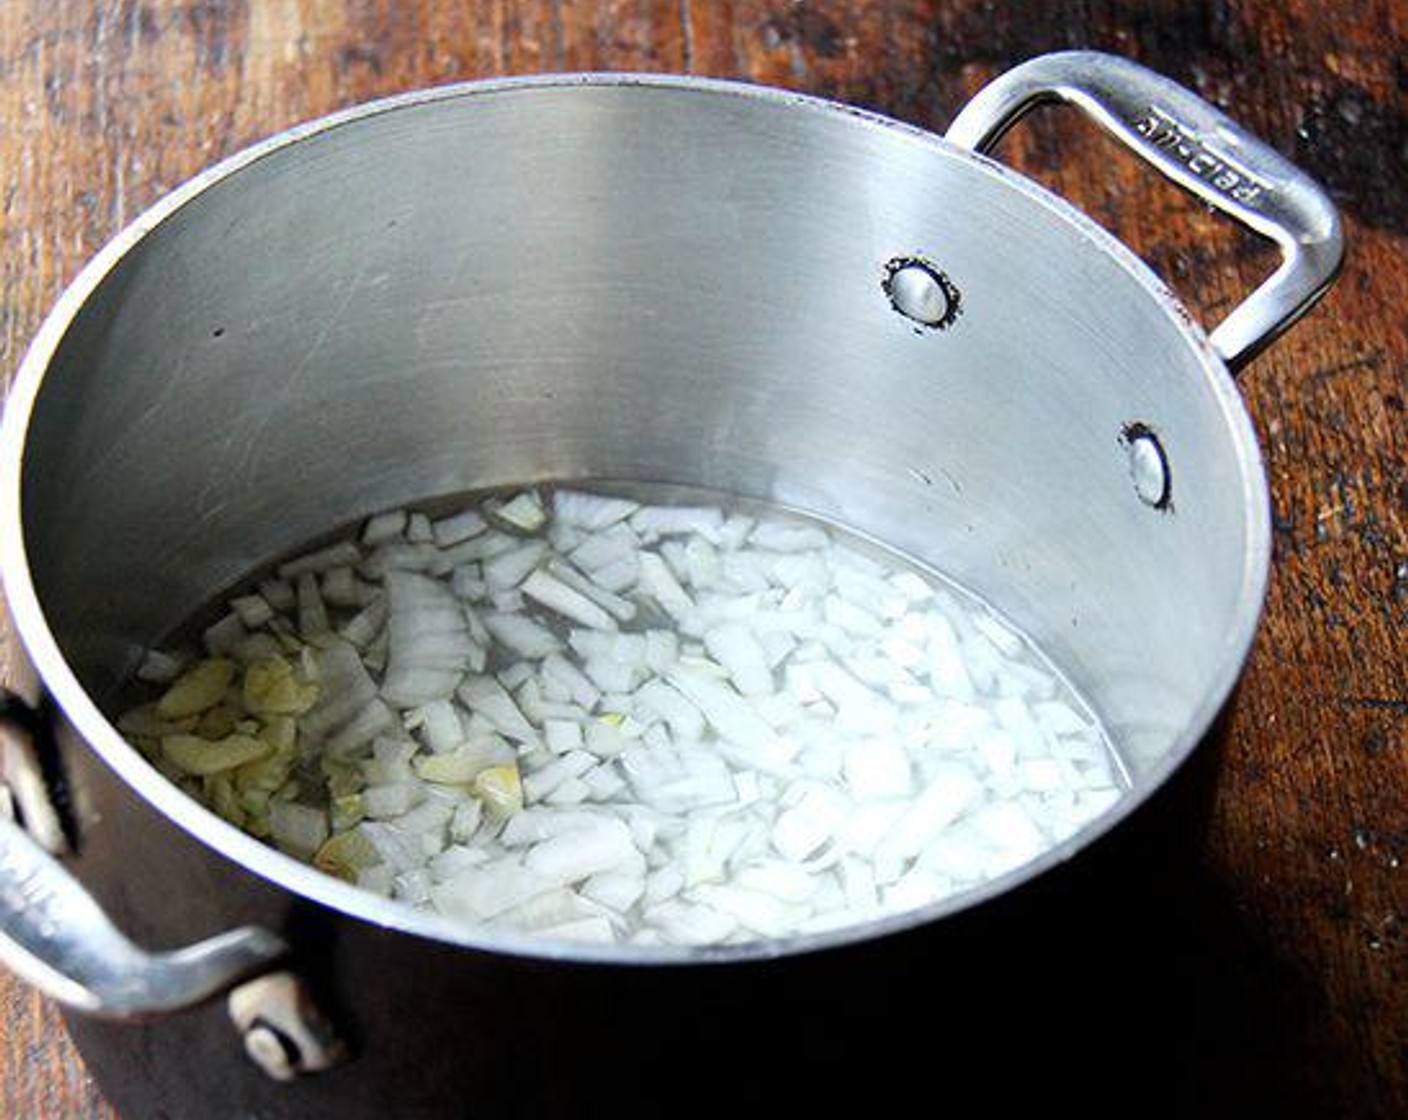 step 1 Heat a medium-size saucepan over low heat. Add the White Onion (1/2), Garlic (1 clove) and Water (1/2 Cup). Cook until the onions and garlic are softened, being careful not to let them burn, 5 to 7 minutes — the water will be nearly evaporated.